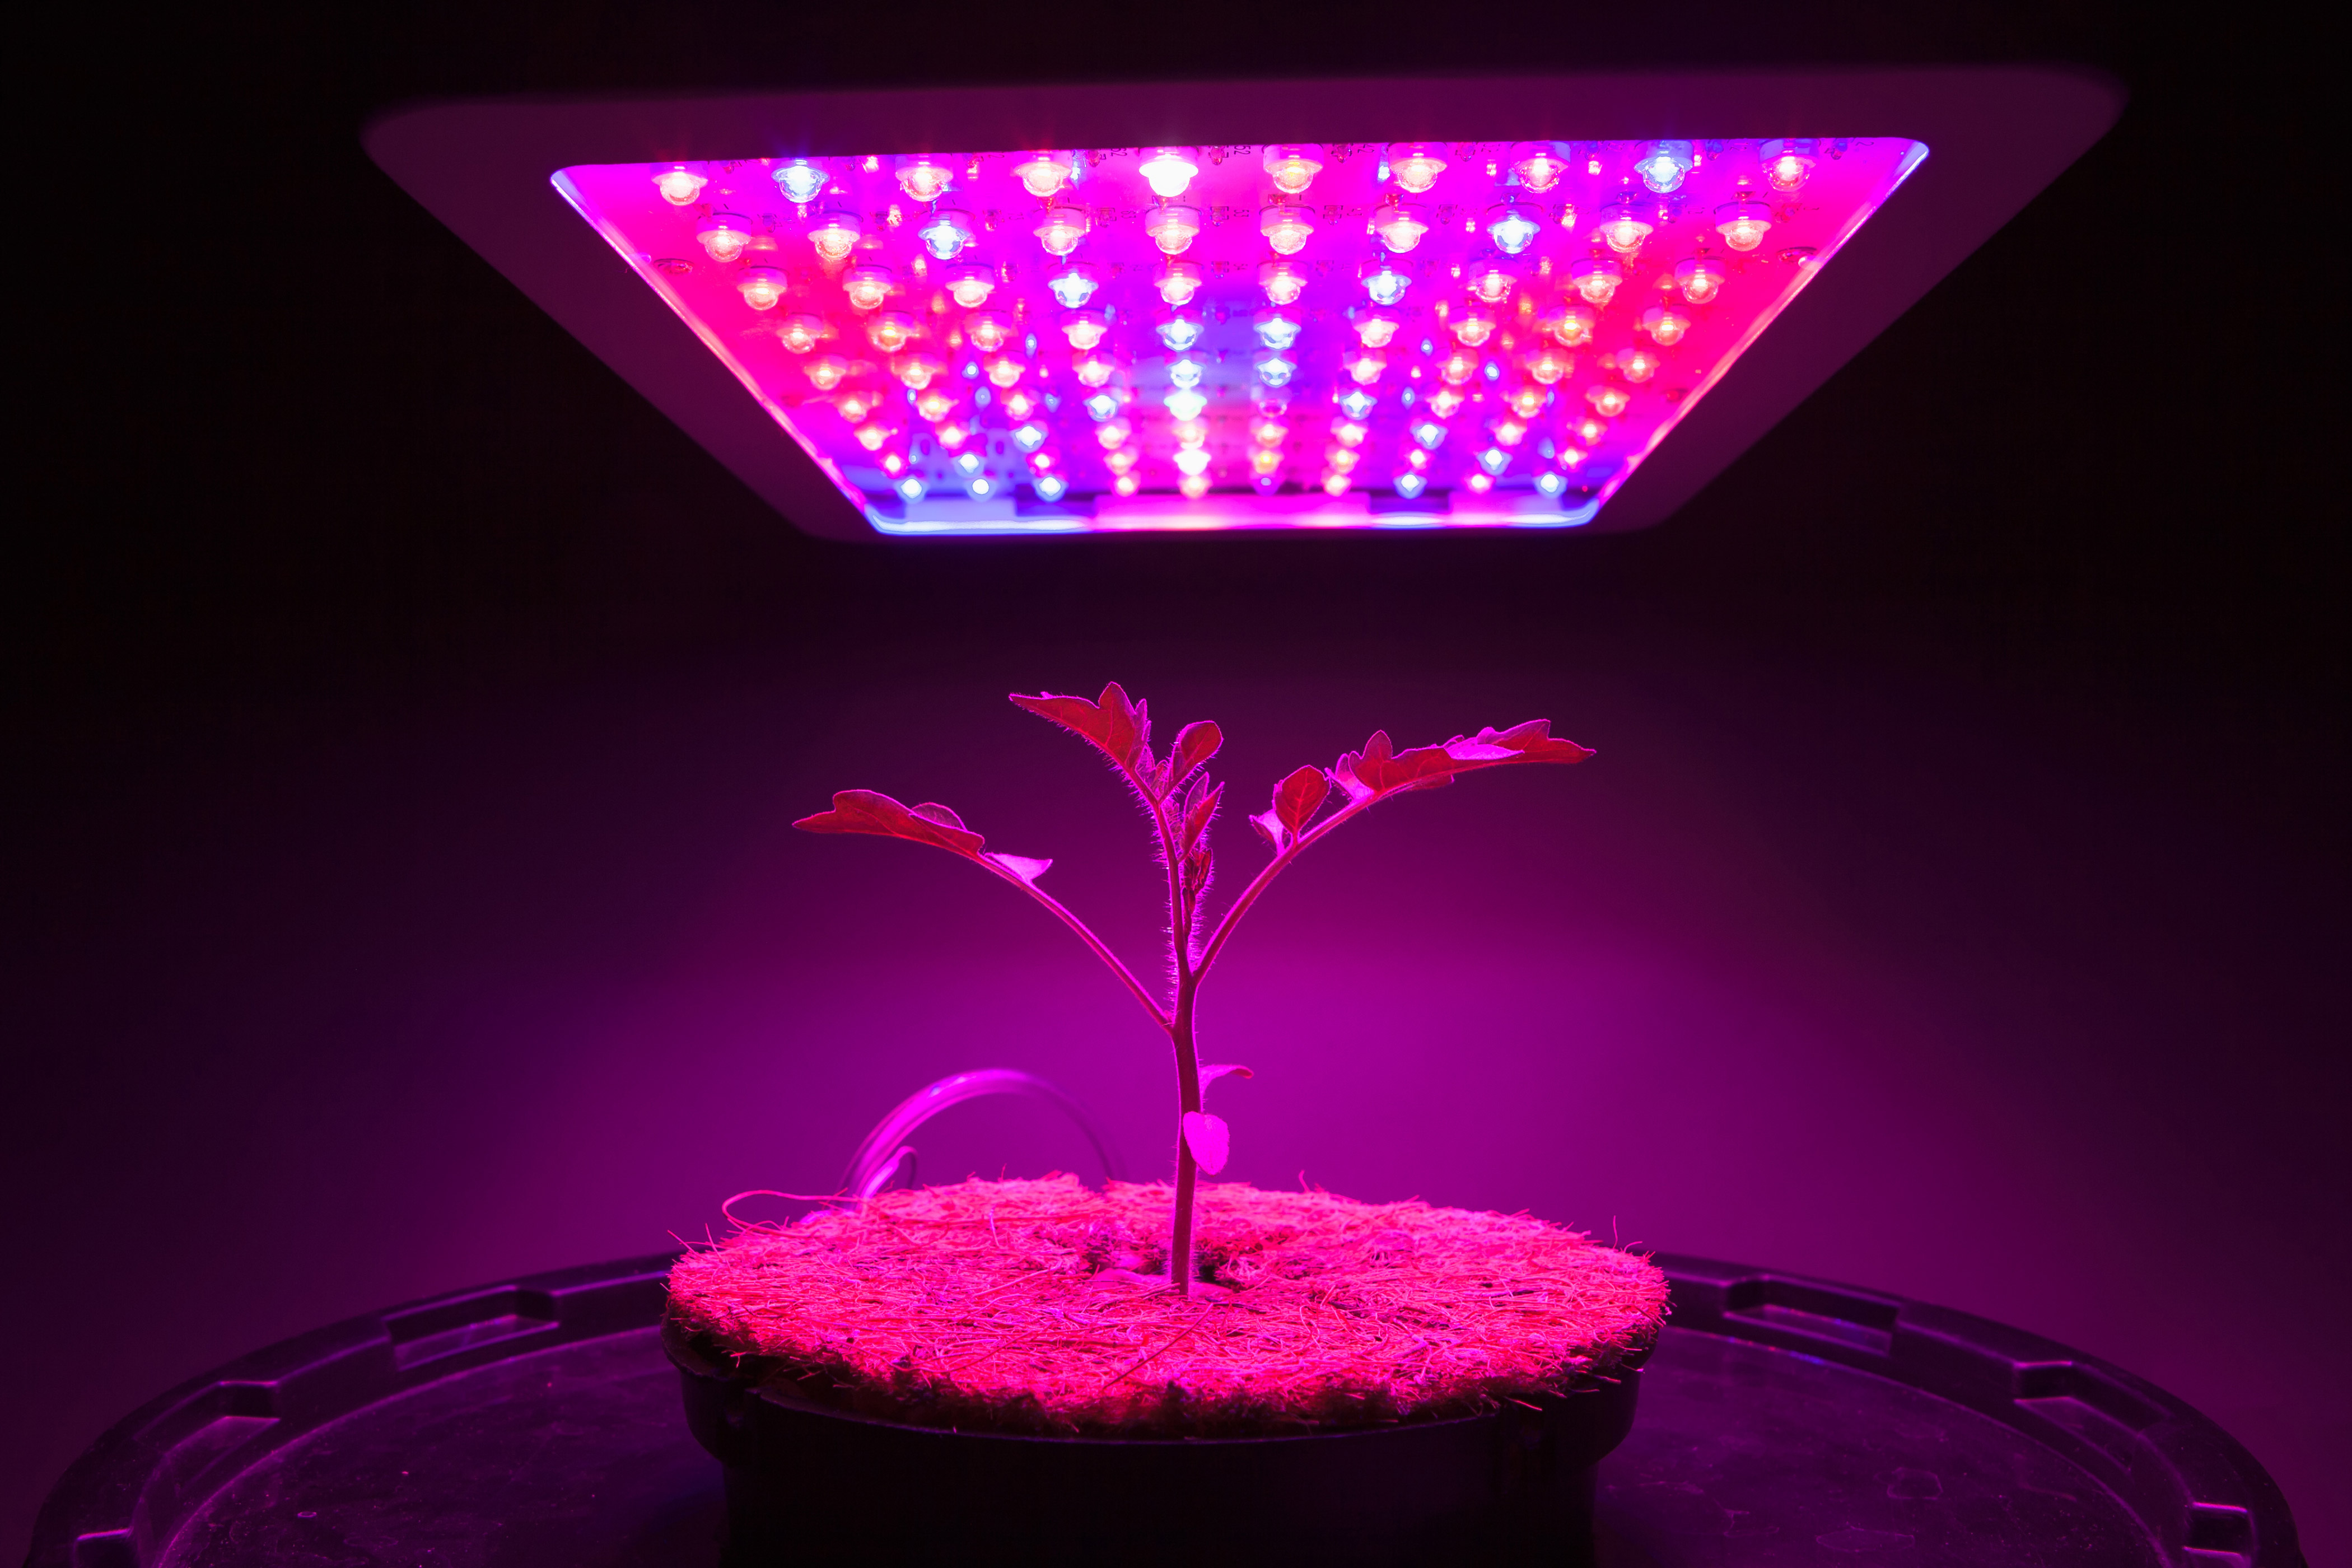 Mouser's Horticulture Site Focuses on LEDs, Sensors, IoT